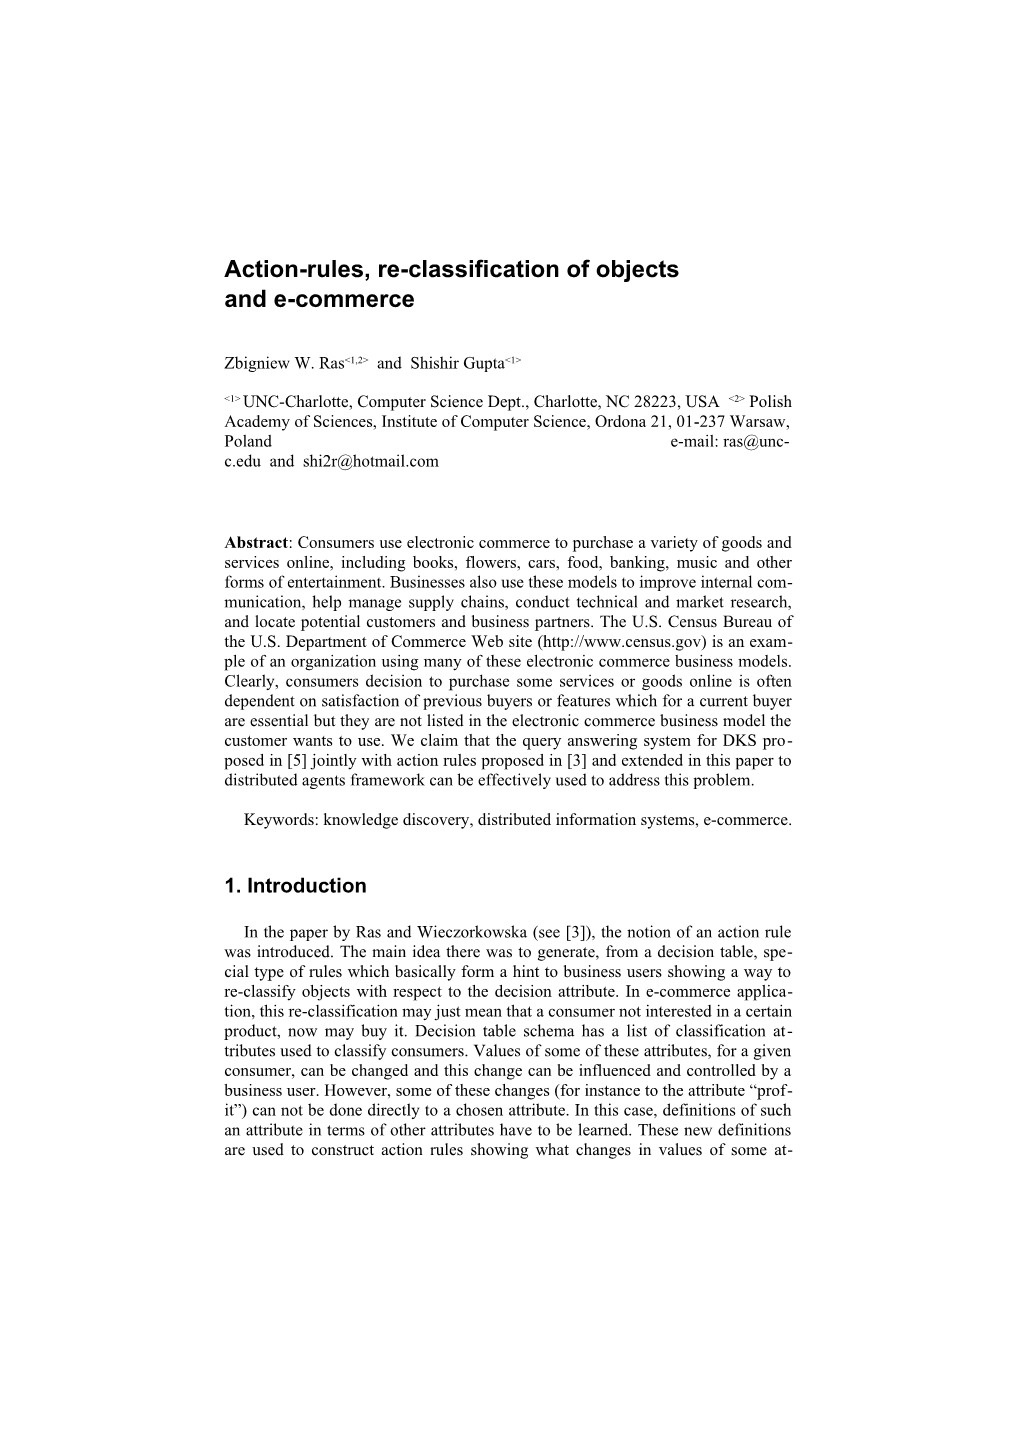 Action-Rules, Re-Classification of Objects Andecommerce